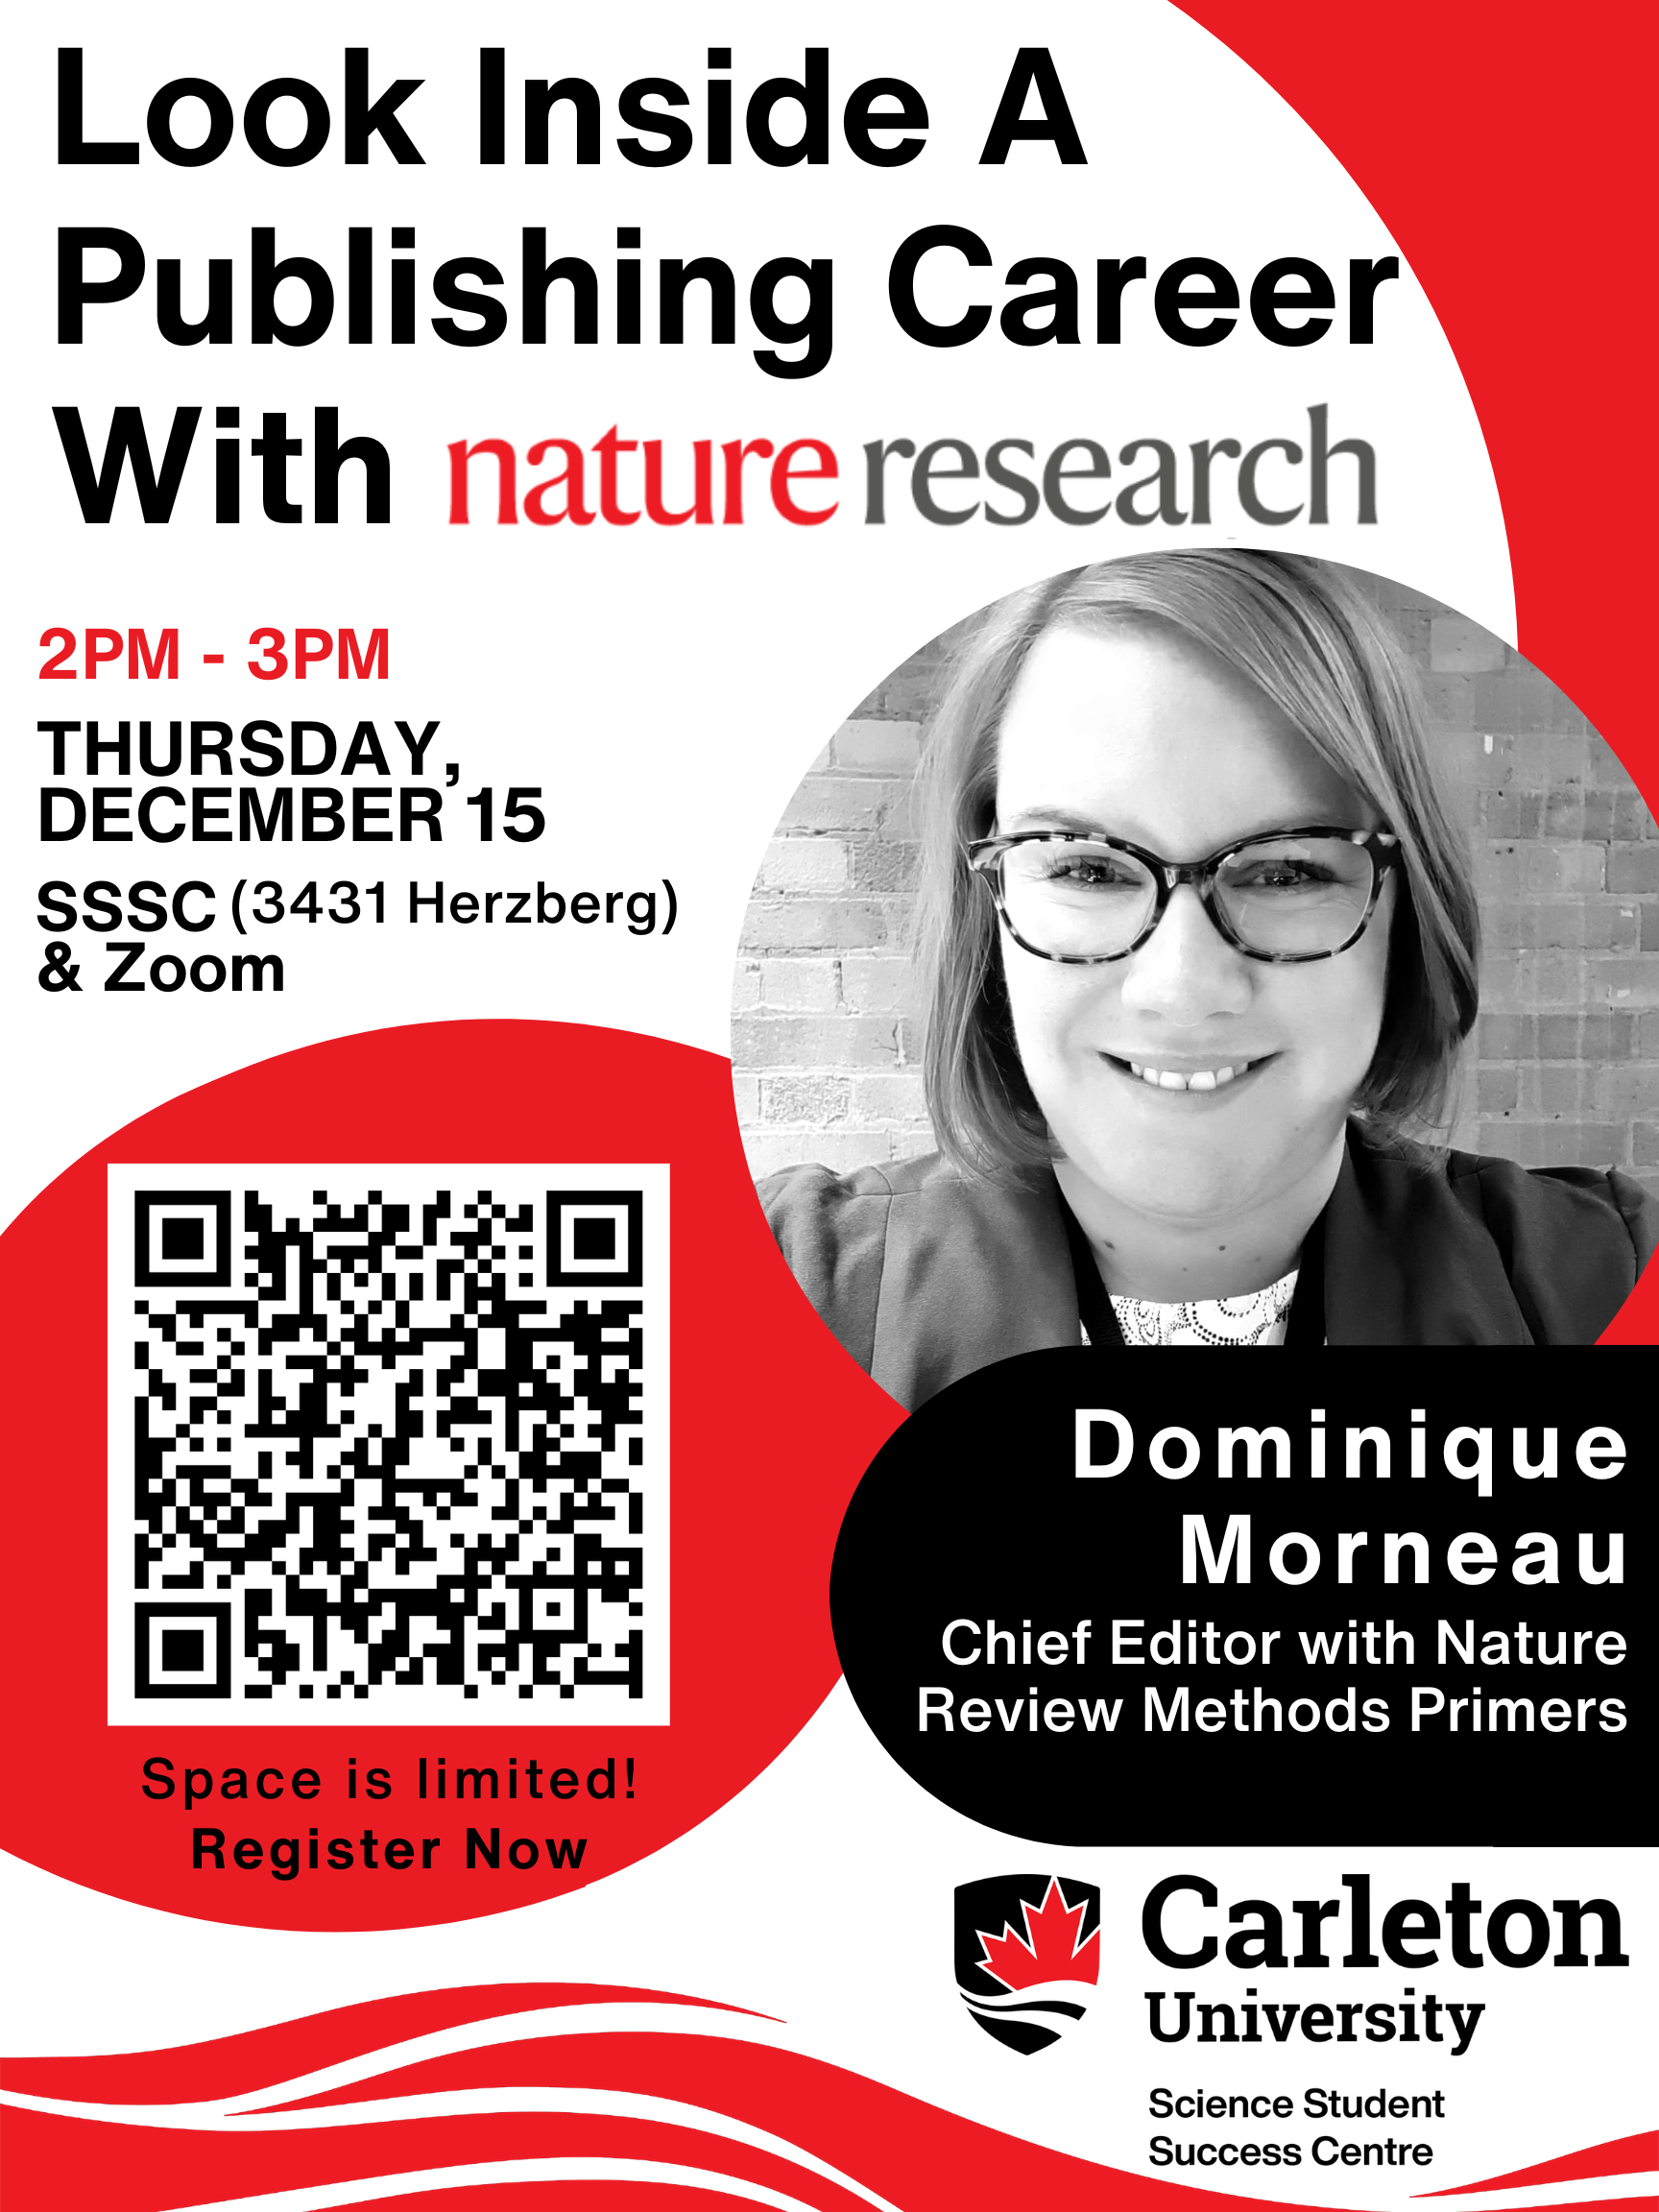 Poster with text. Headshot of Guest Speaker: Dominique Morneau shown. Text reads: Look Inside A Publishing Career With nature research. 2PM - 3PM Thursday, December 15, SSSC (3431 Herzberg) & Zoom. Dominique Morneau, Chief Editor with Nature Review Methods Primers. Space is limited! Register Now. Carleton University, Science Student Success Centre. QR Code provided. 